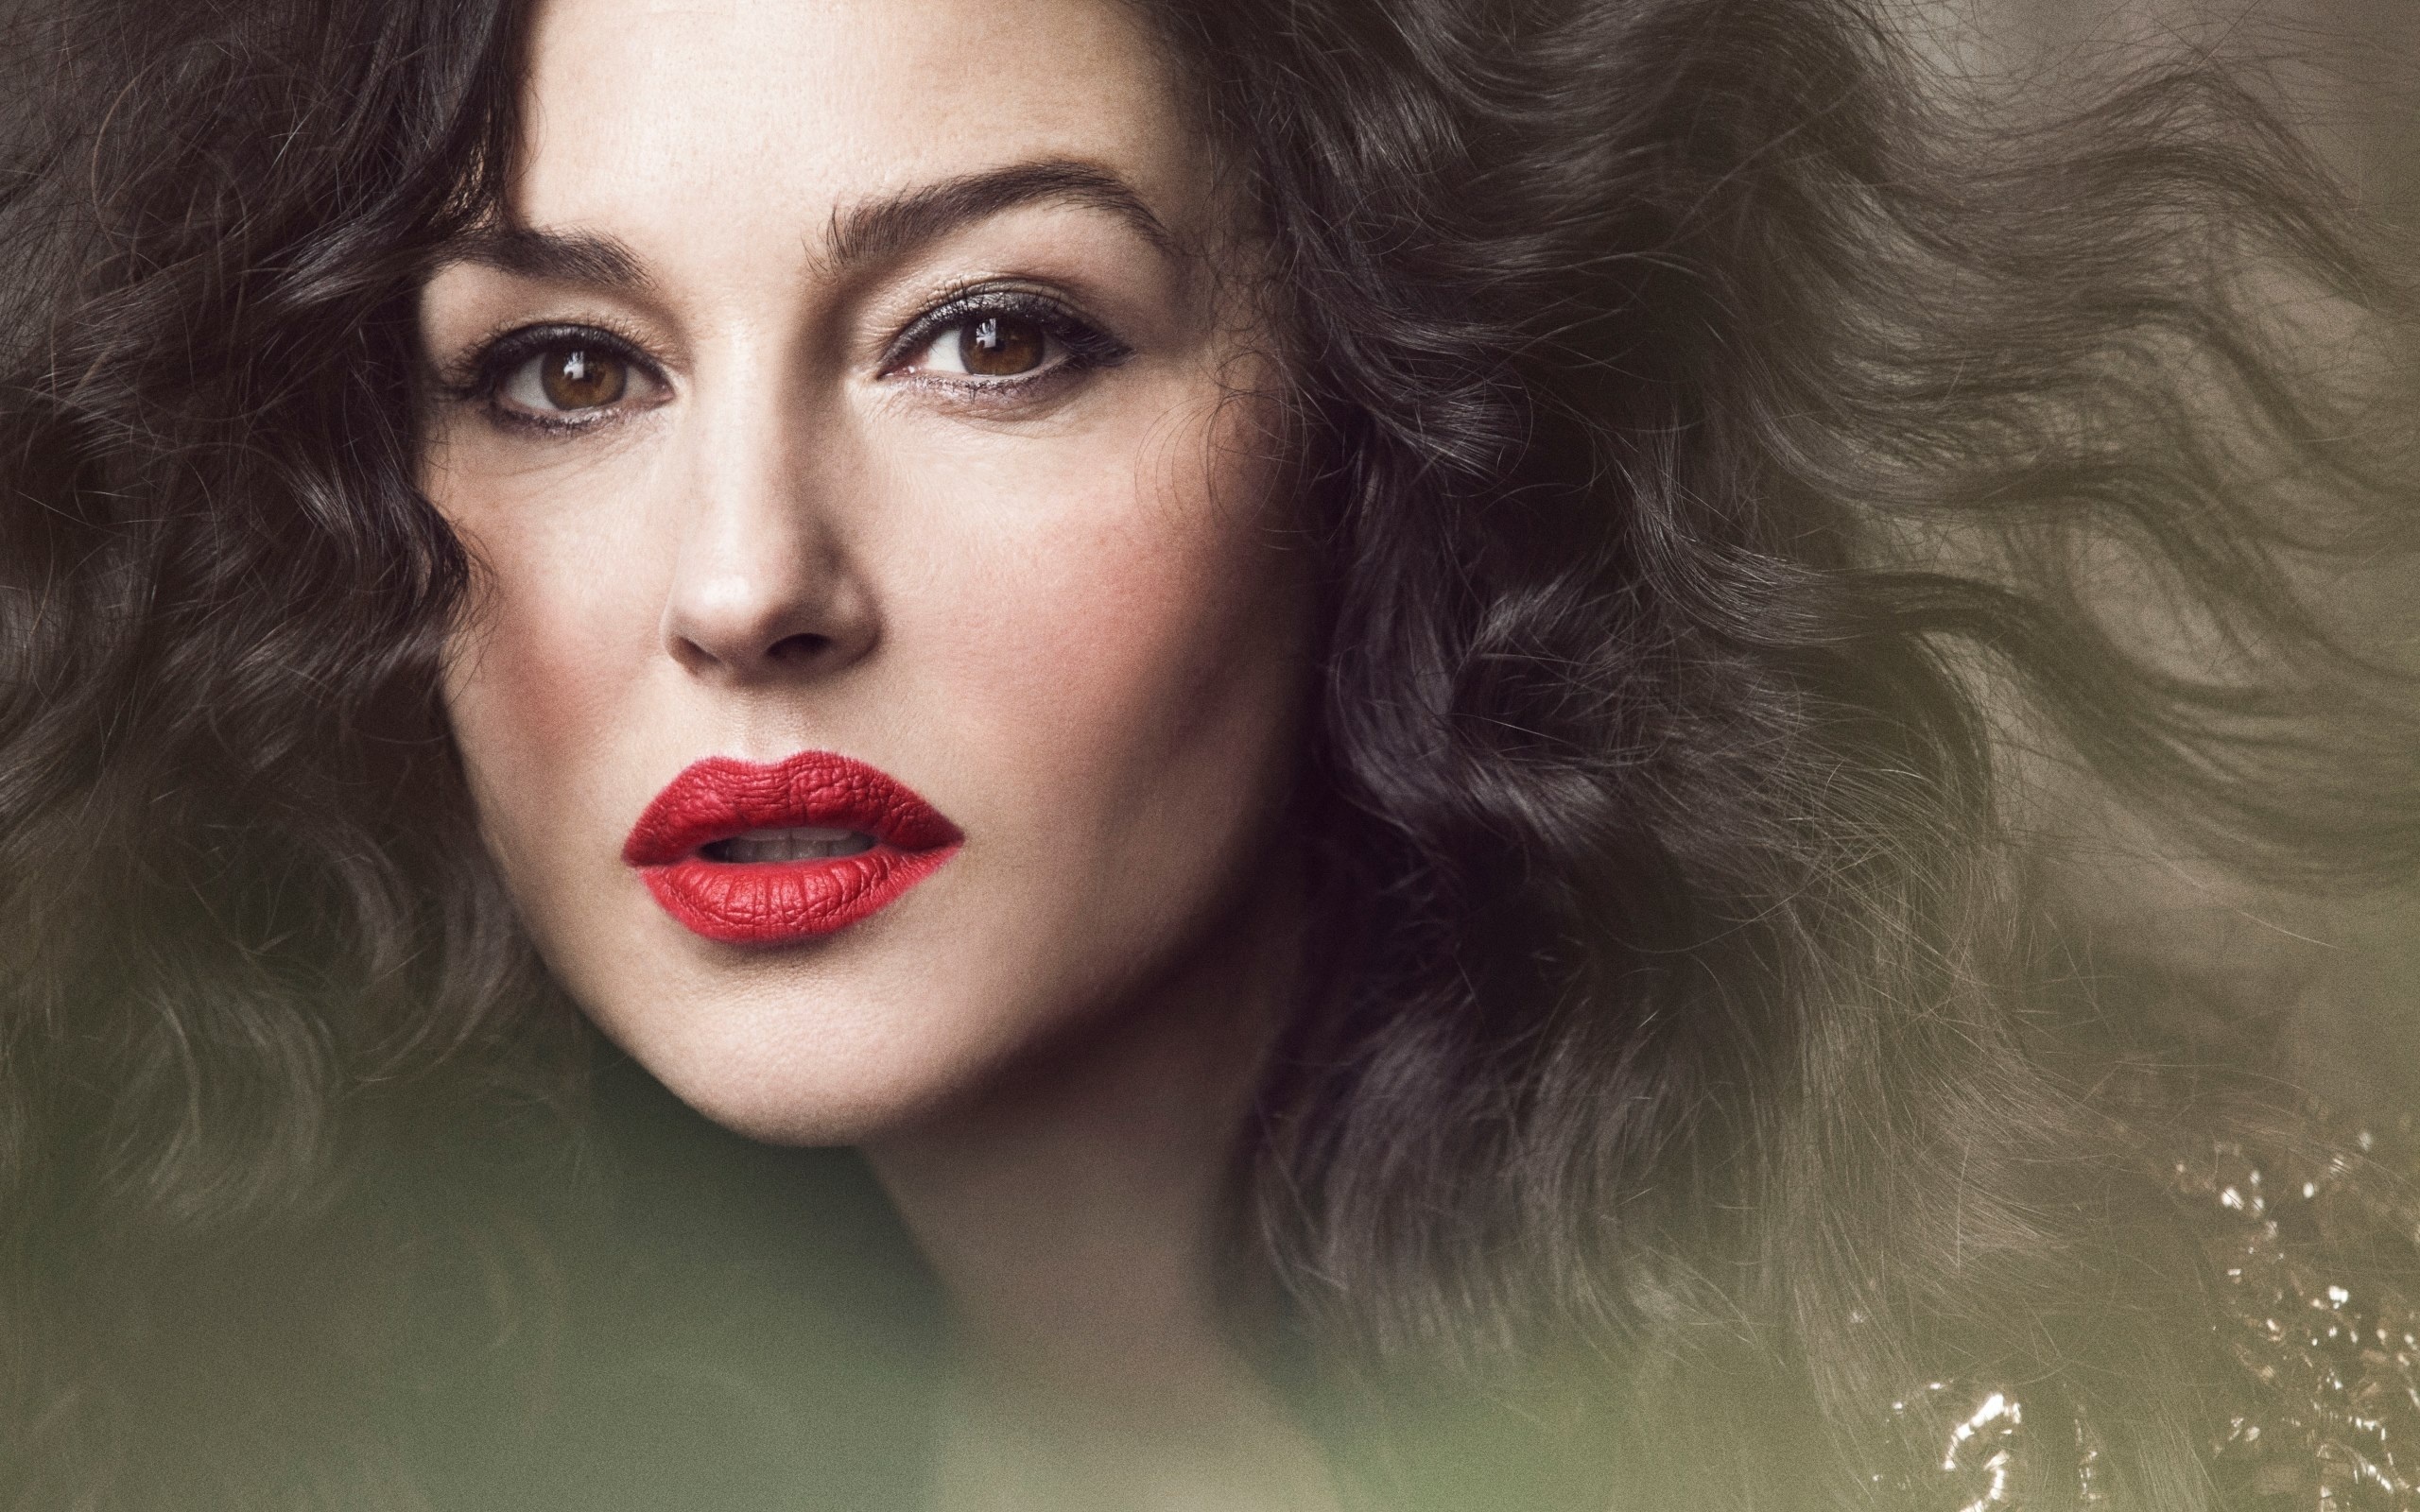 Monica Bellucci Wallpaper Image Photos Pictures Background